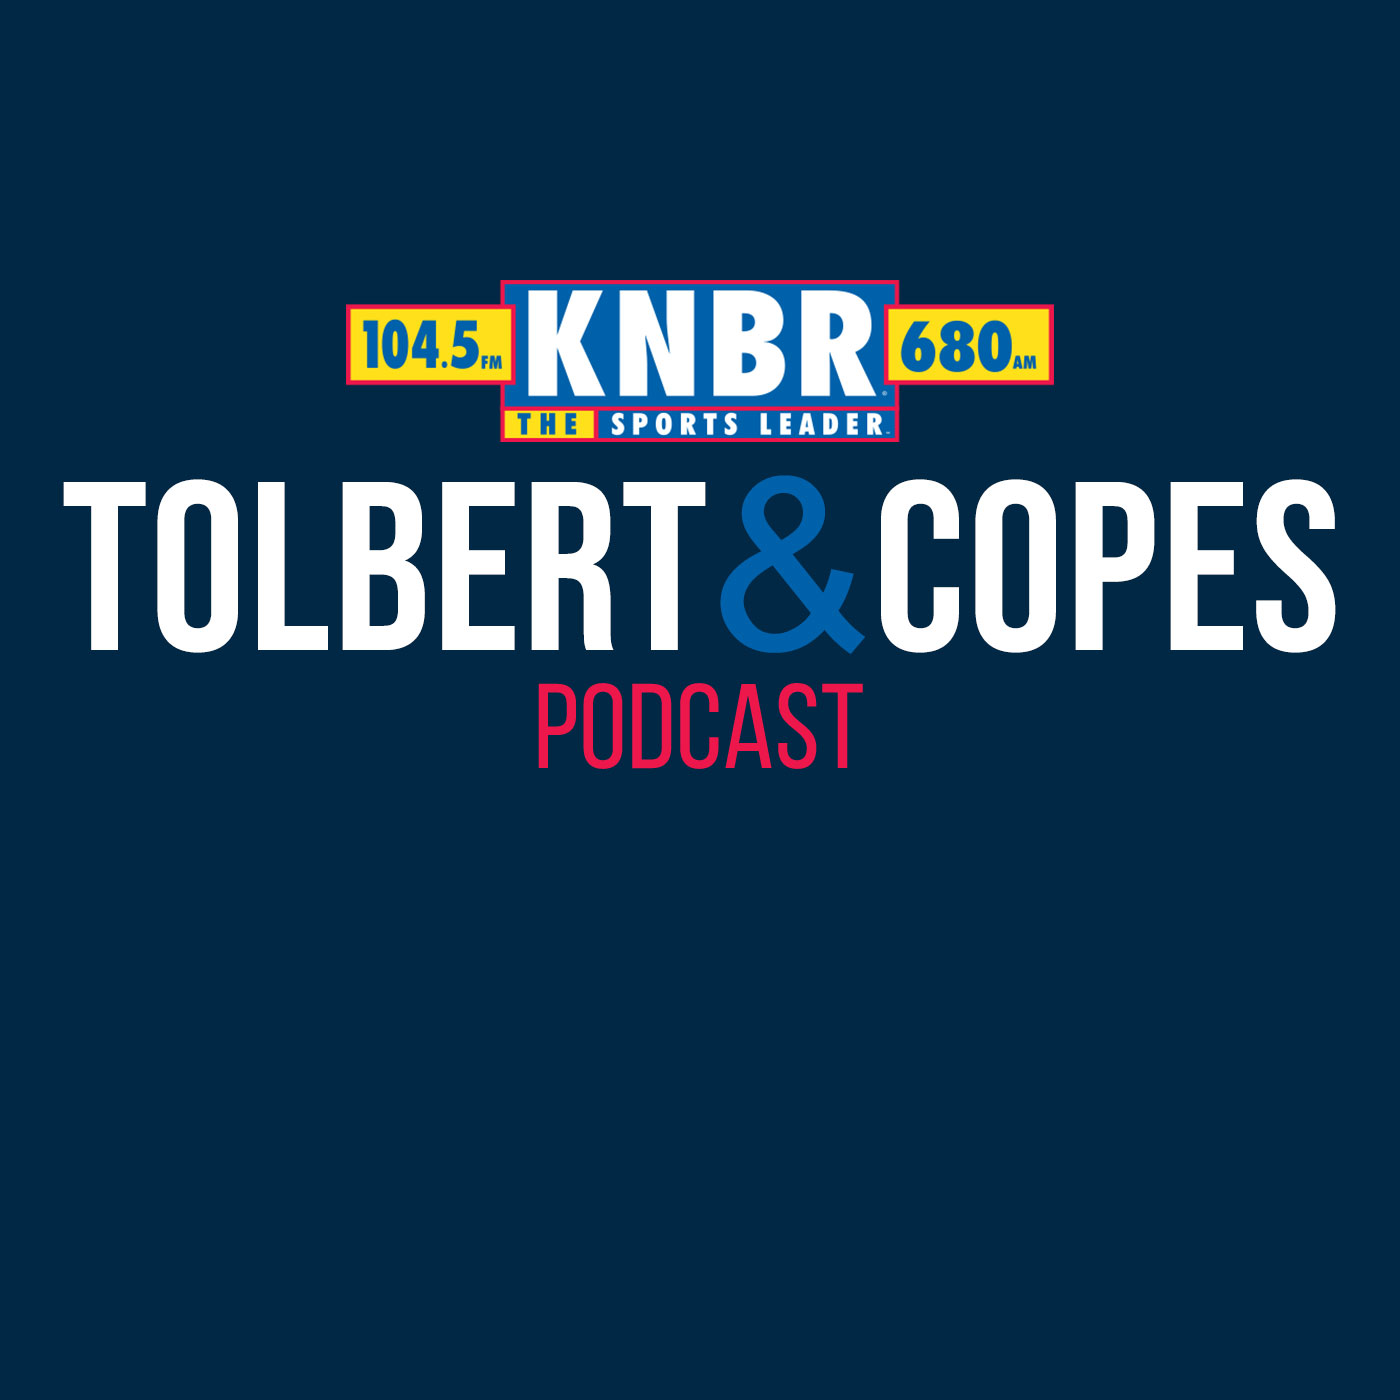 6-24 Jeff Brantley joins Tolbert & Copes to discuss Joc Pederson & Tommy Pham meeting since the slap